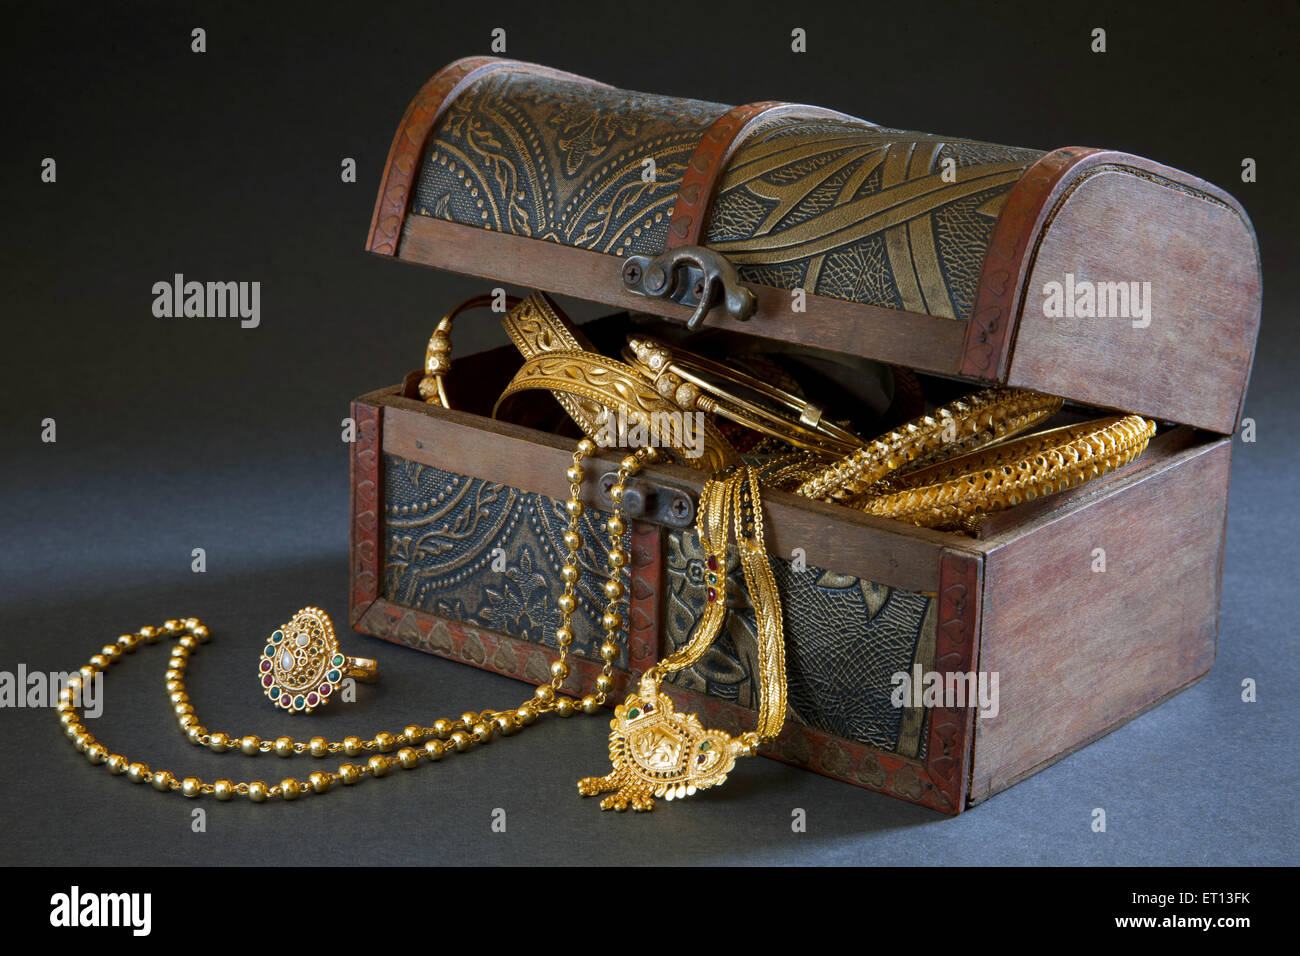 Wooden Jewellery box with Gold Bangles Necklace and Ring Stock Photo